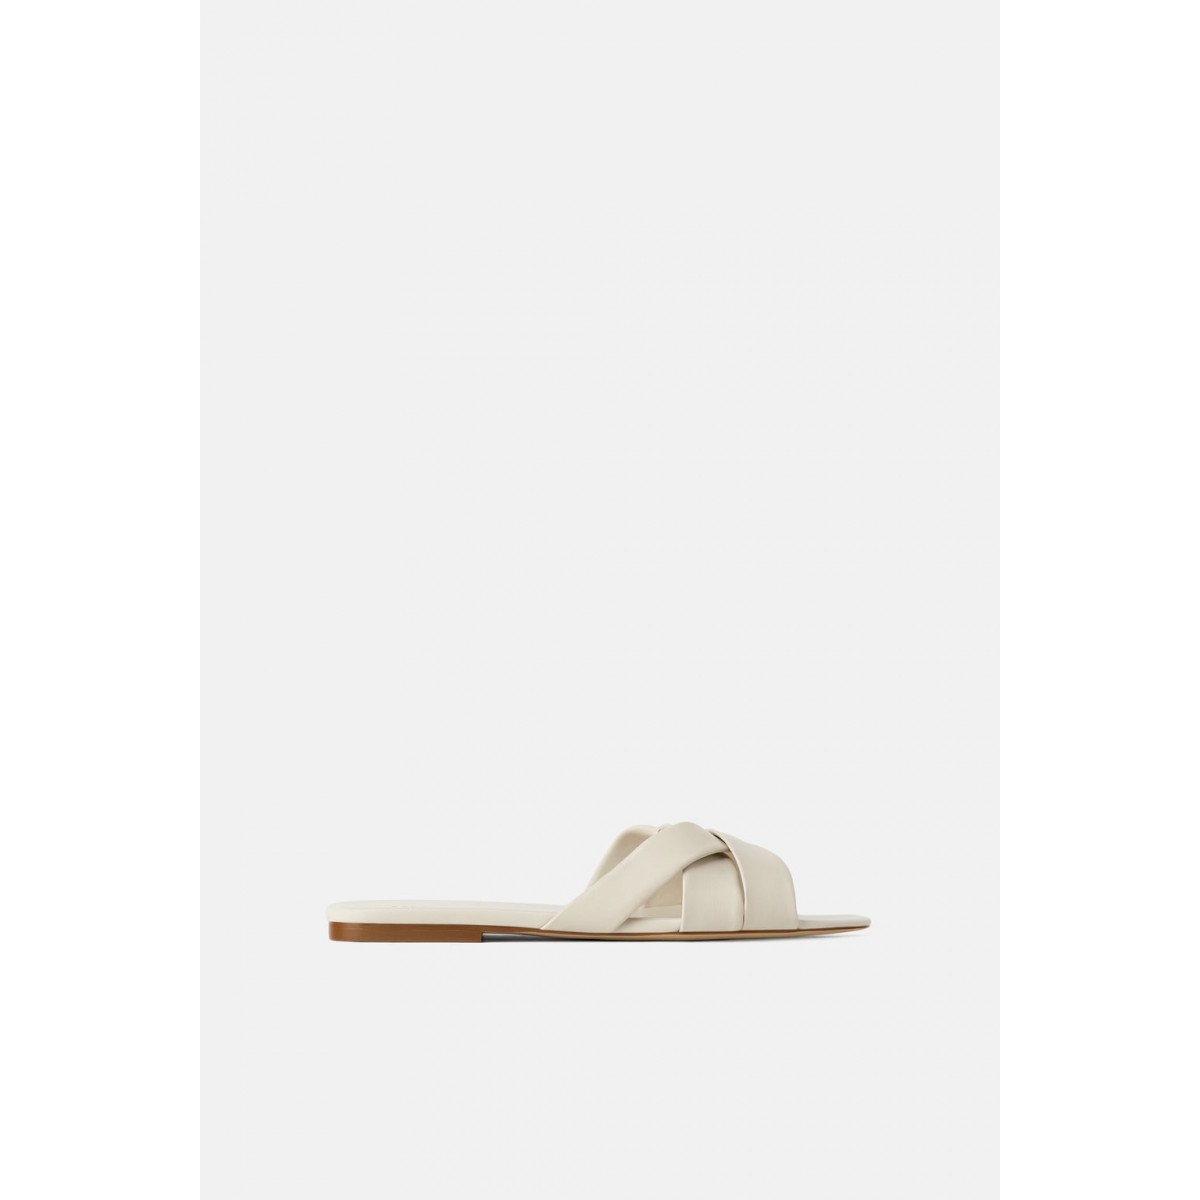 Zara Flat Leather Sandals With Criss-Cross Straps